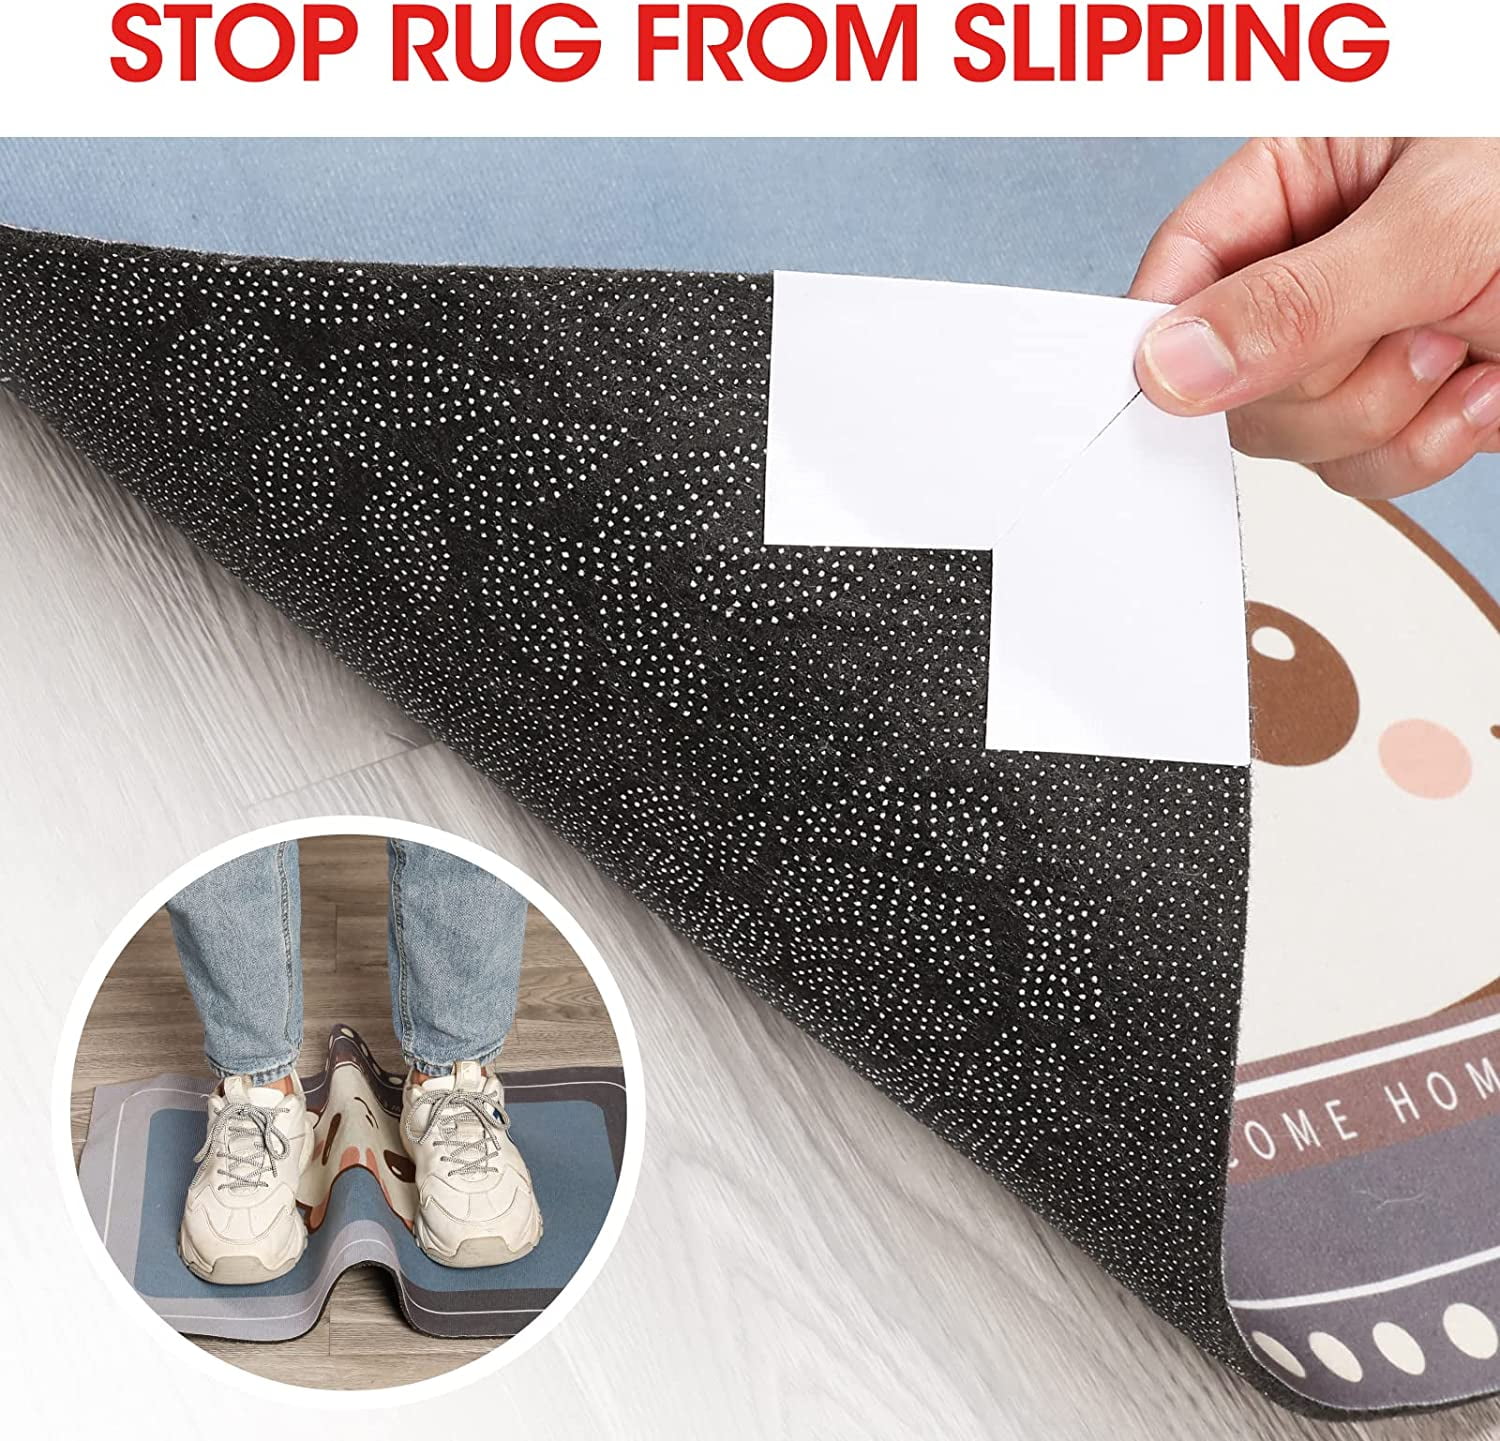 Sollifa Rug Tape,16 Pcs Dual Sided Washable Removable Rug Stopper Grip Your Area Rug, Non Slip Adhesive Prevent Curl for Hardwood Floors Grip Carpet